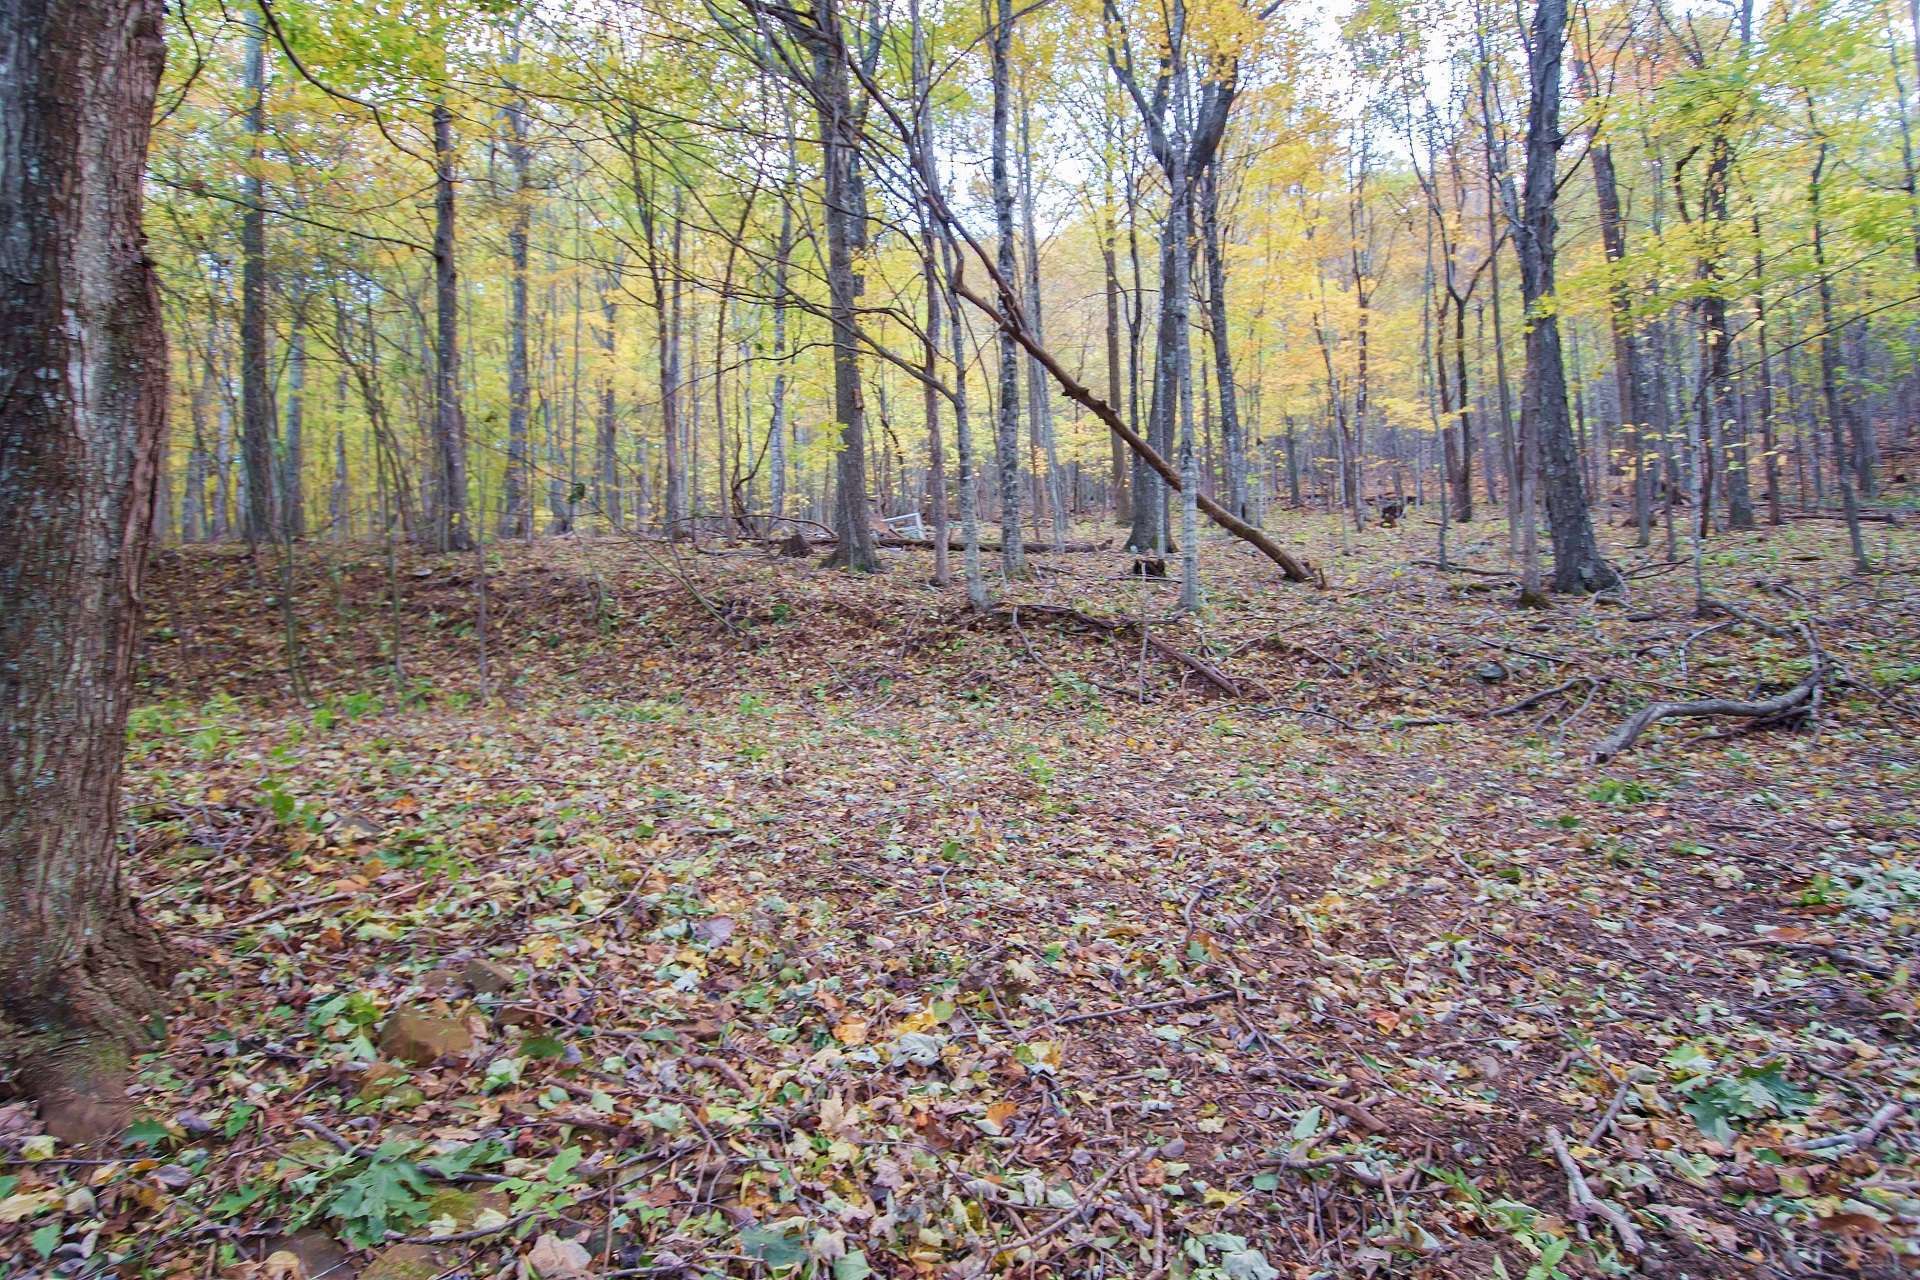 Offered at only $45,000, this 2.77 acre wooded and unrestricted acreage tract is the ideal choice for your Blue Ridge Mountain cabin in the woods and close to Mount Jefferson State Park. H287